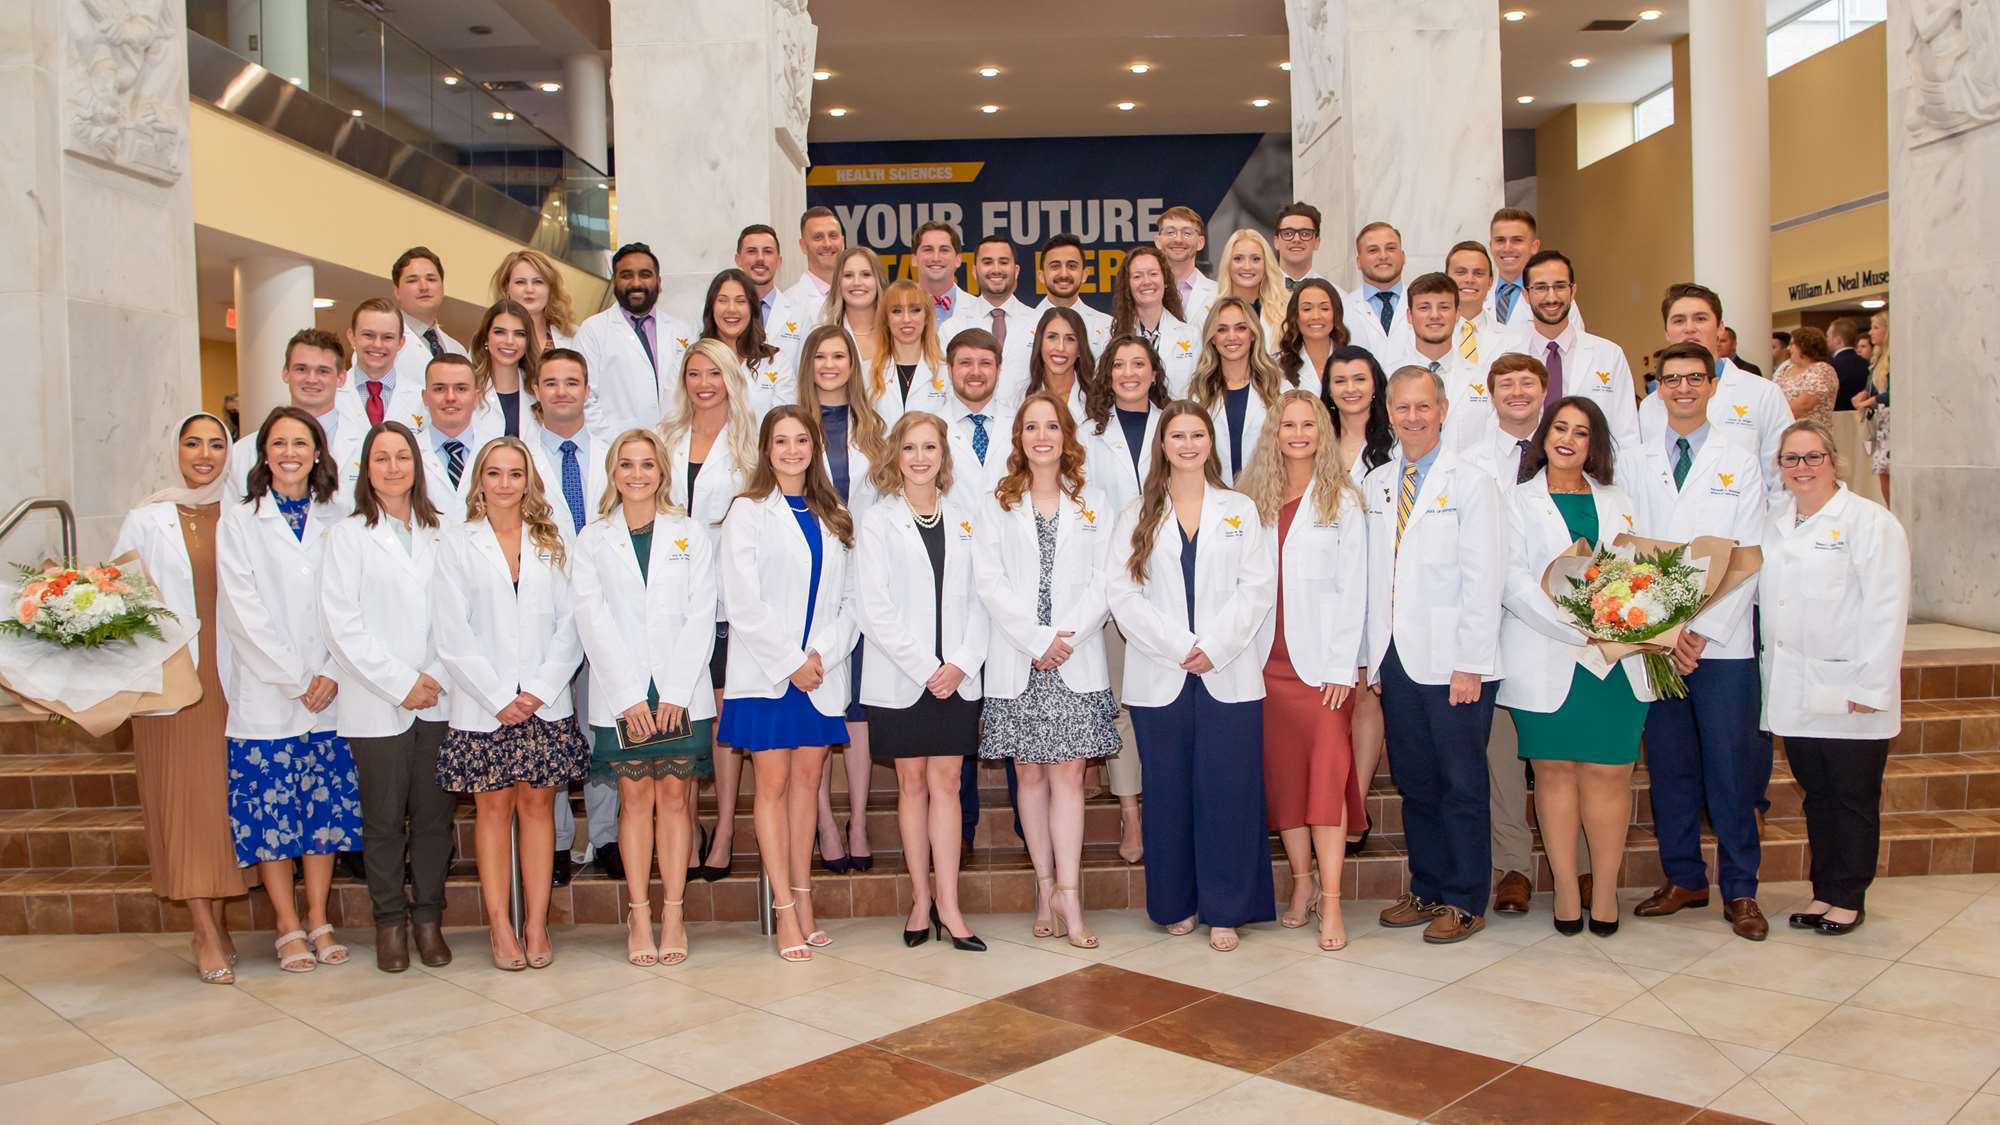 Prior to beginning direct patient care, students receive white coats and commit to a pledge of professionalism.